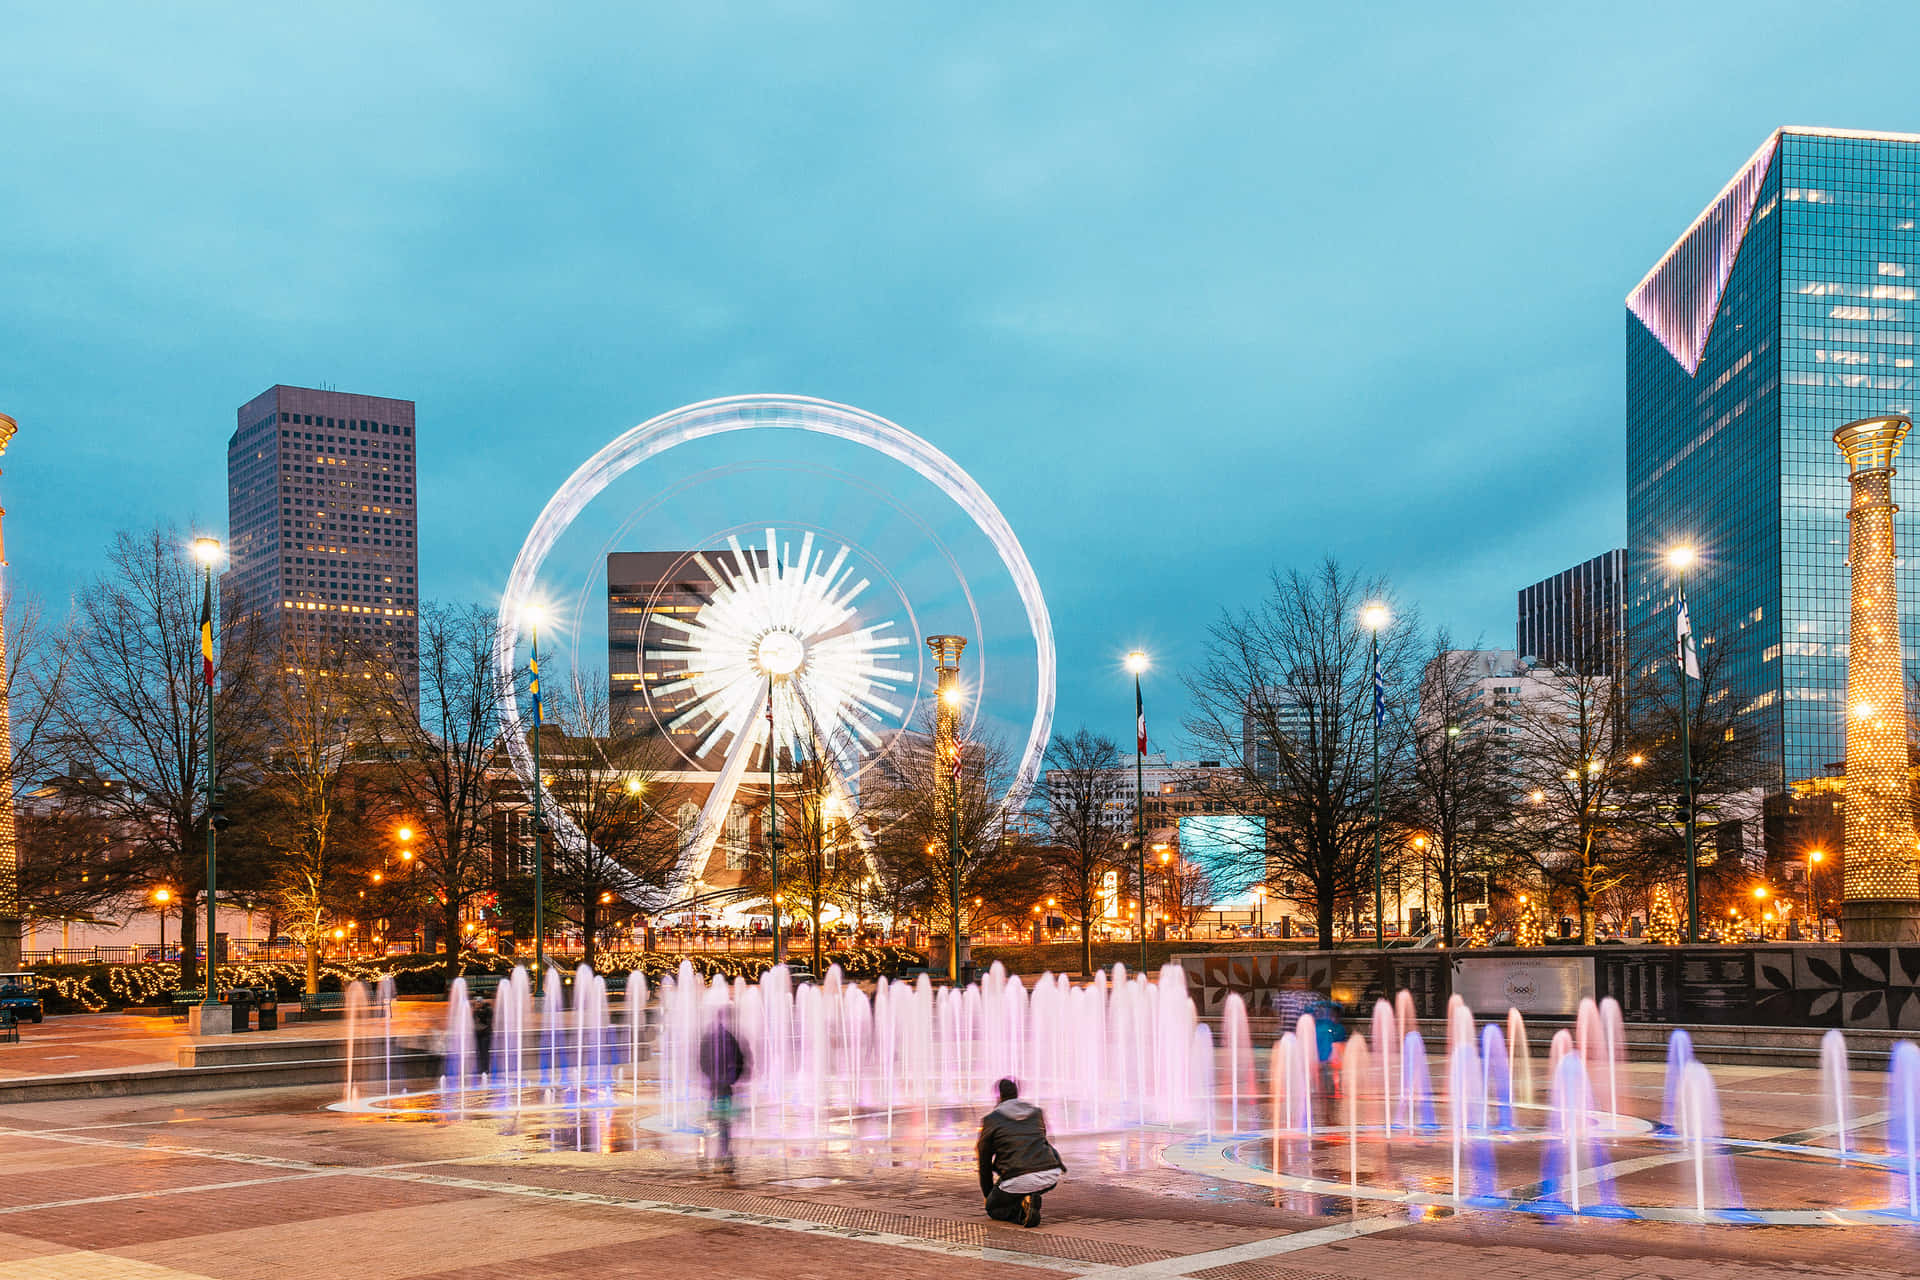 A City With A Fountain And A Ferris Wheel